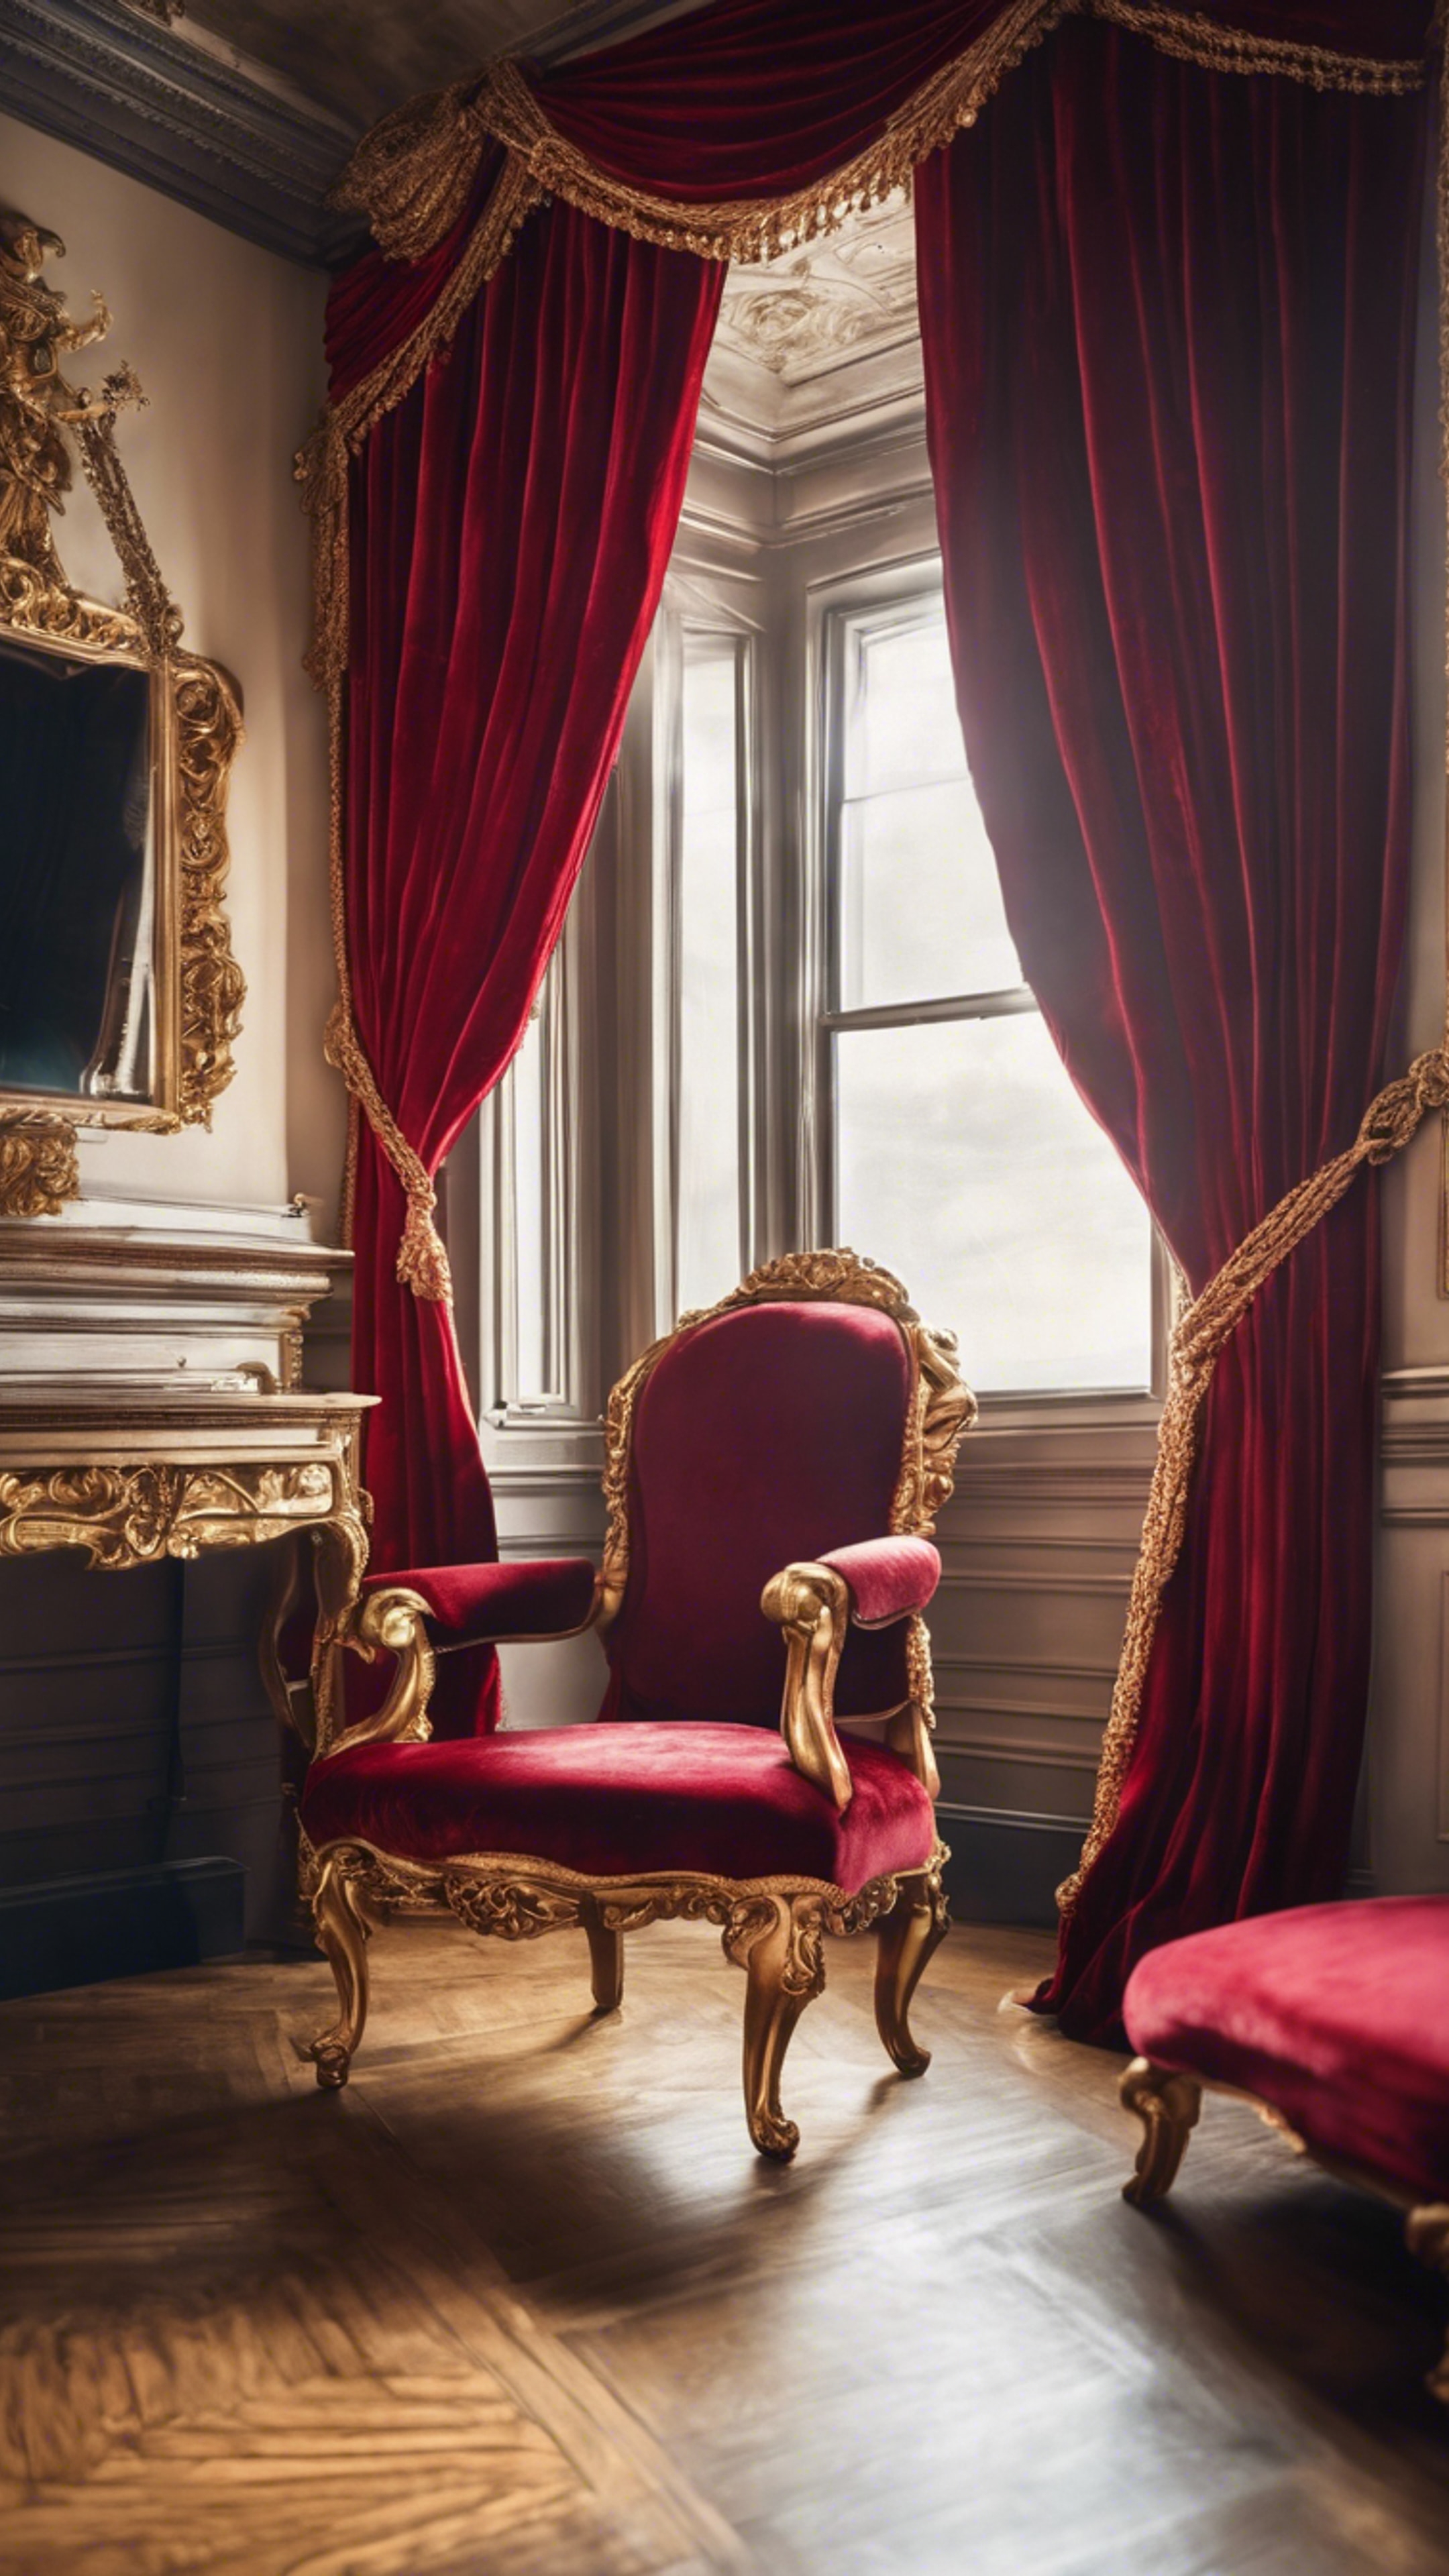 Red velvet drapes tied back with gold ropes in a grand victorian-style living room. วอลล์เปเปอร์[6c8dd2a9b4f74c0eb869]